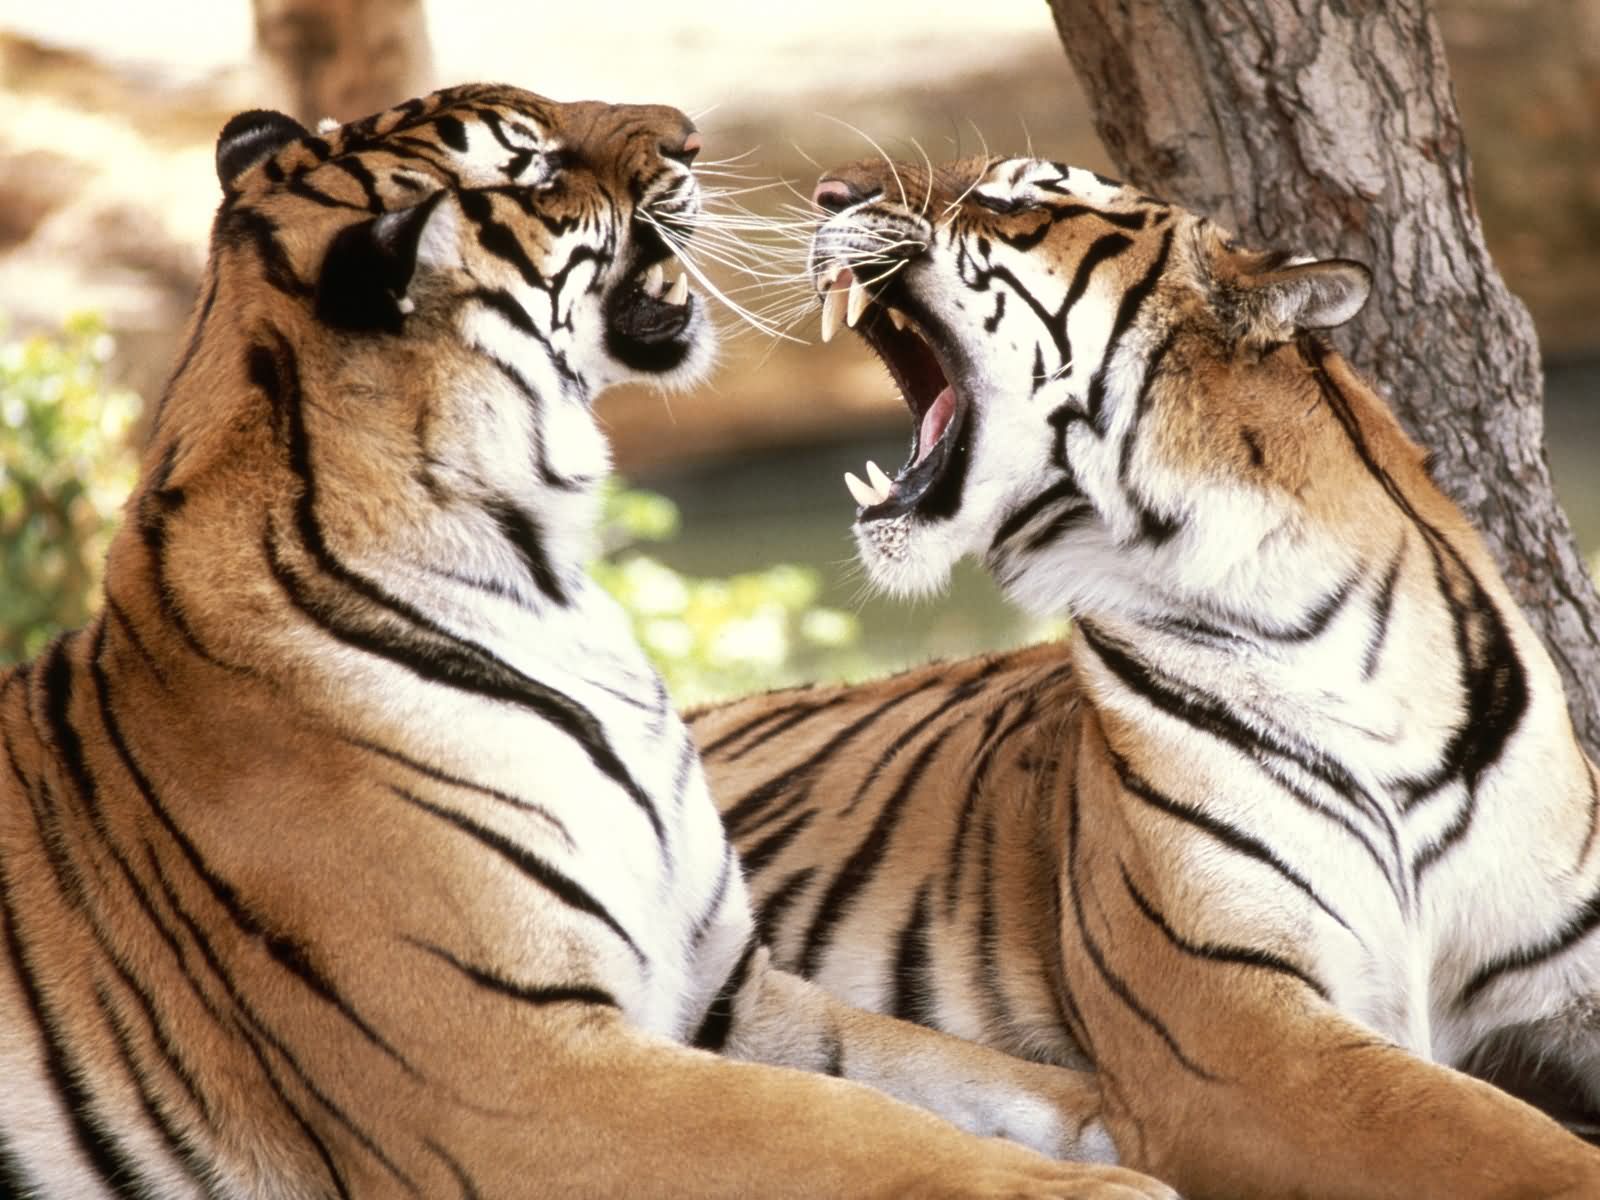 Couple Tiger Angry Face Funny Image